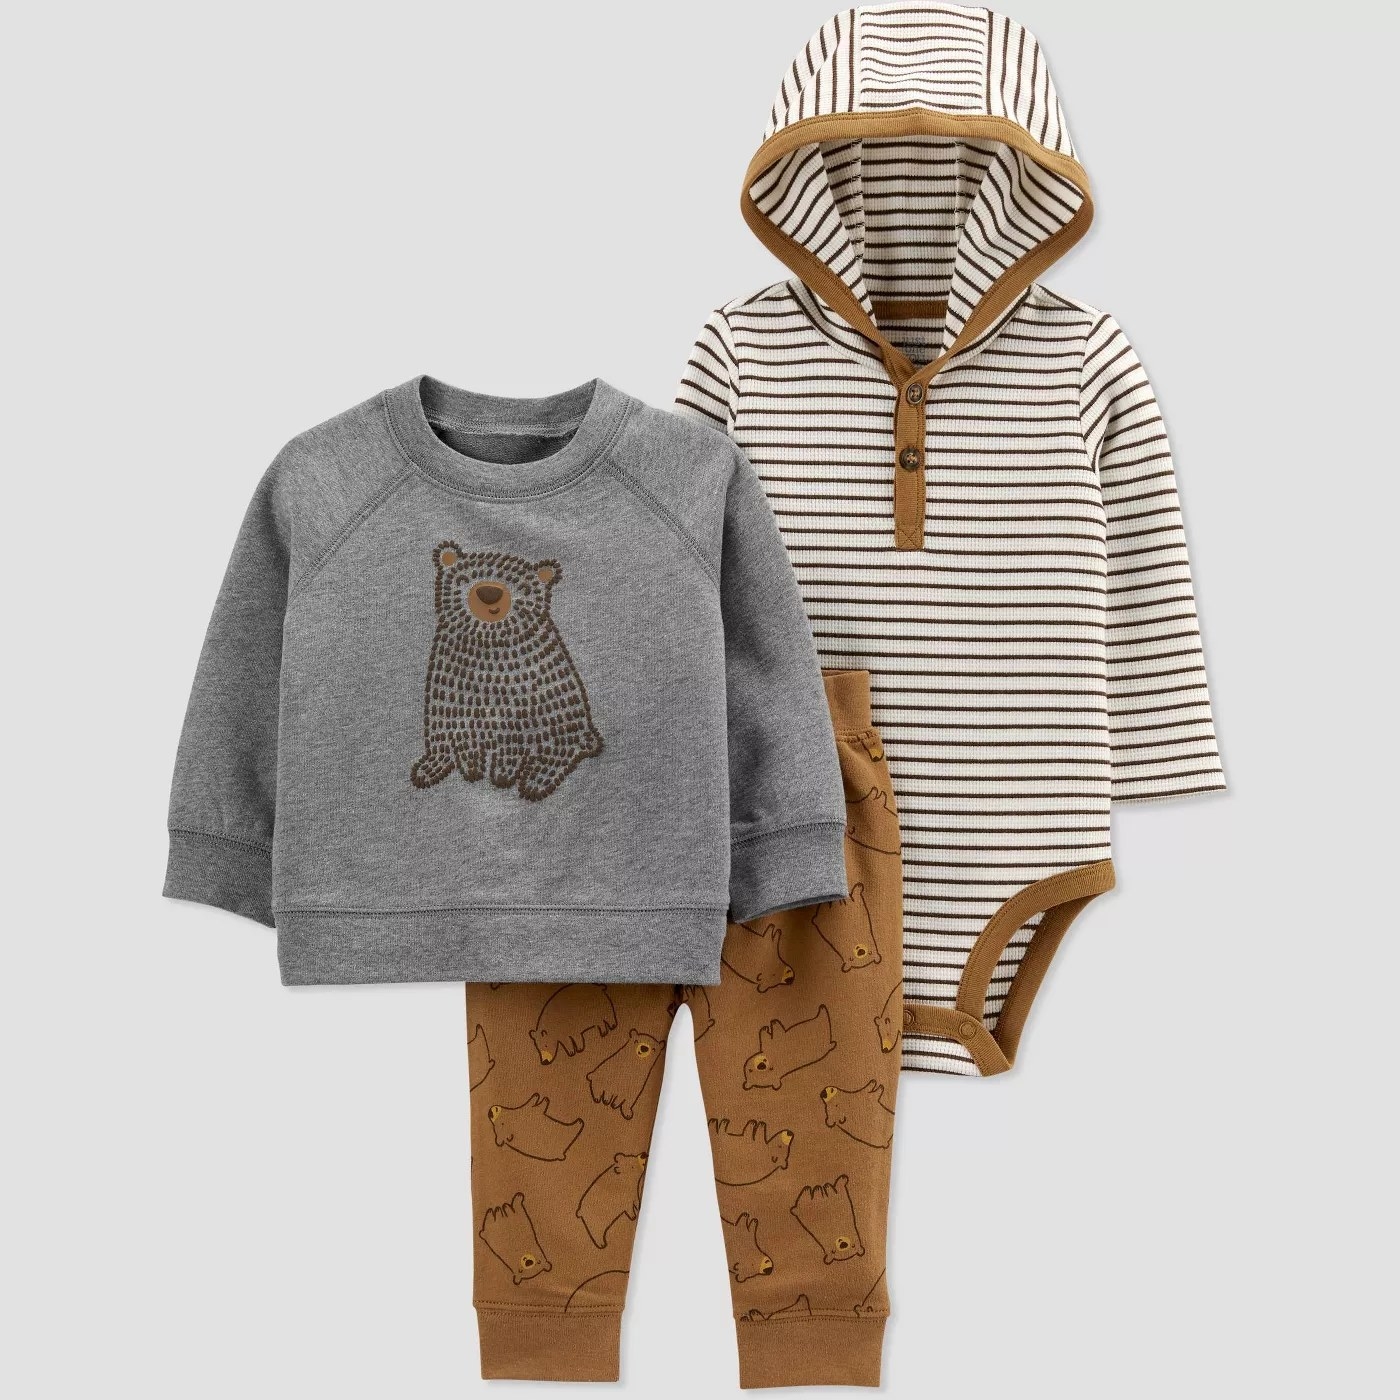 A striped onesie, a gray sweater with a bear, and brown leggings with a bear pattern